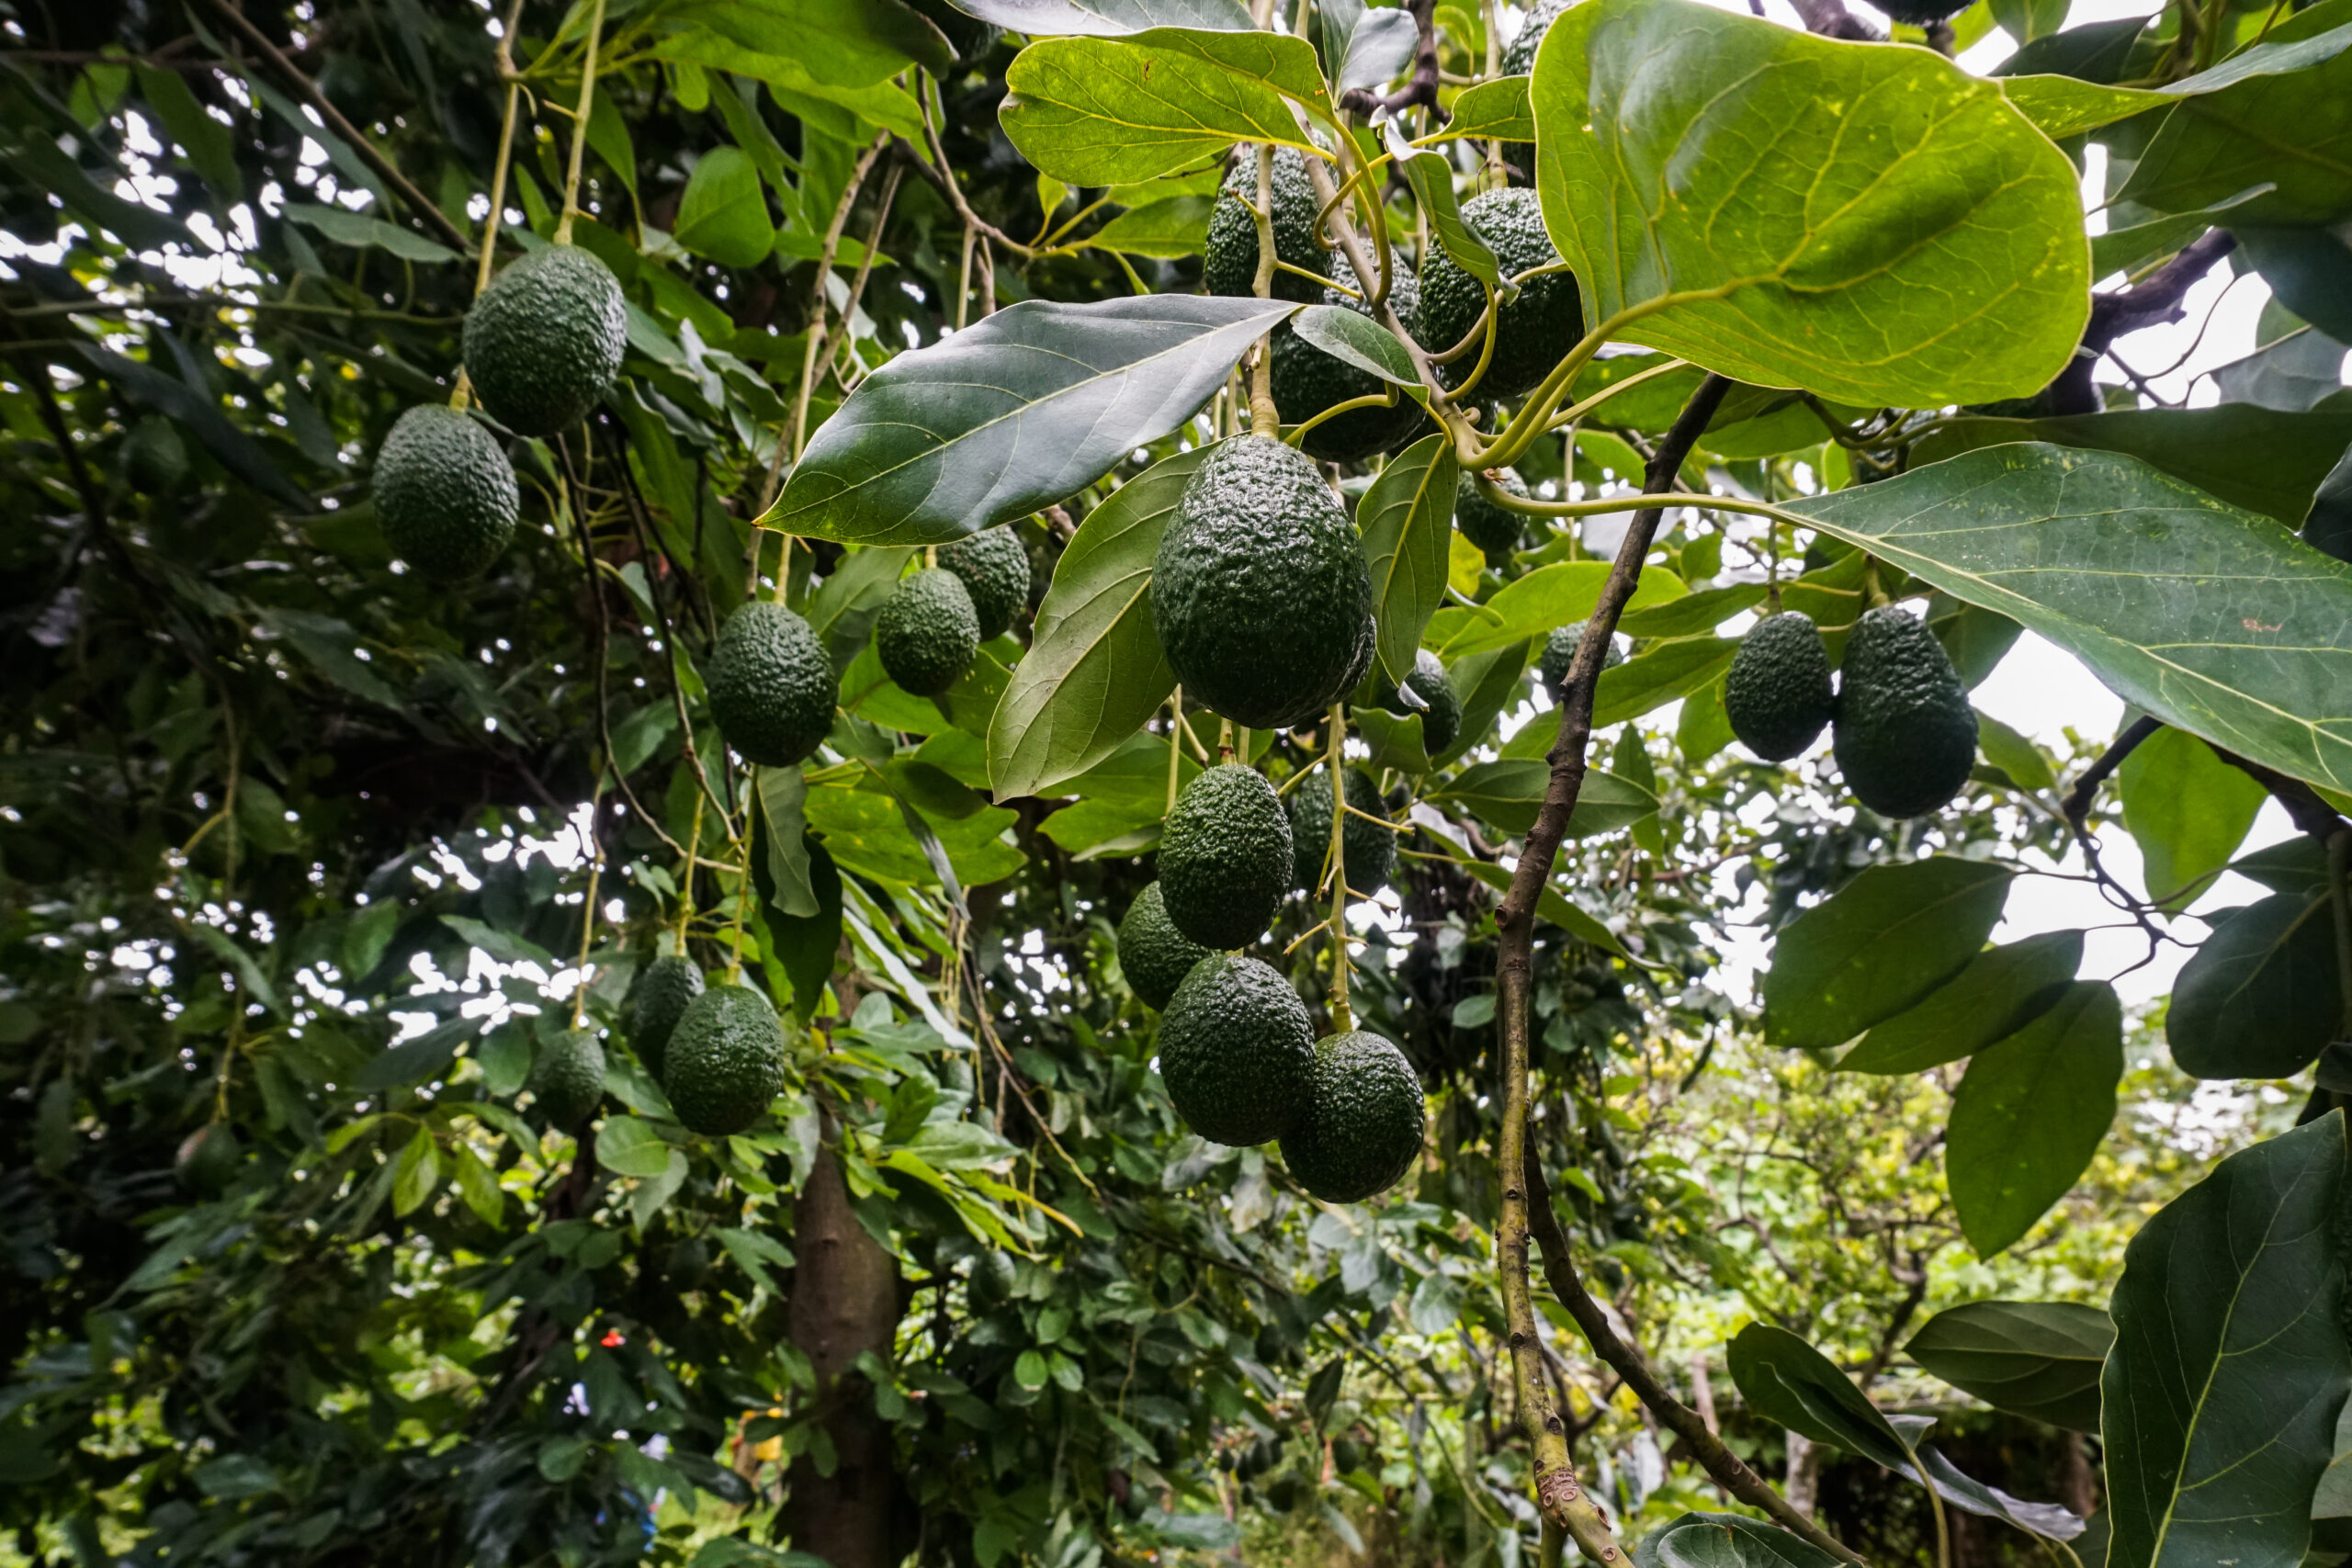 Fresh green avocados hang in clusters from healthy avocado trees in Jalisco, Mexico.